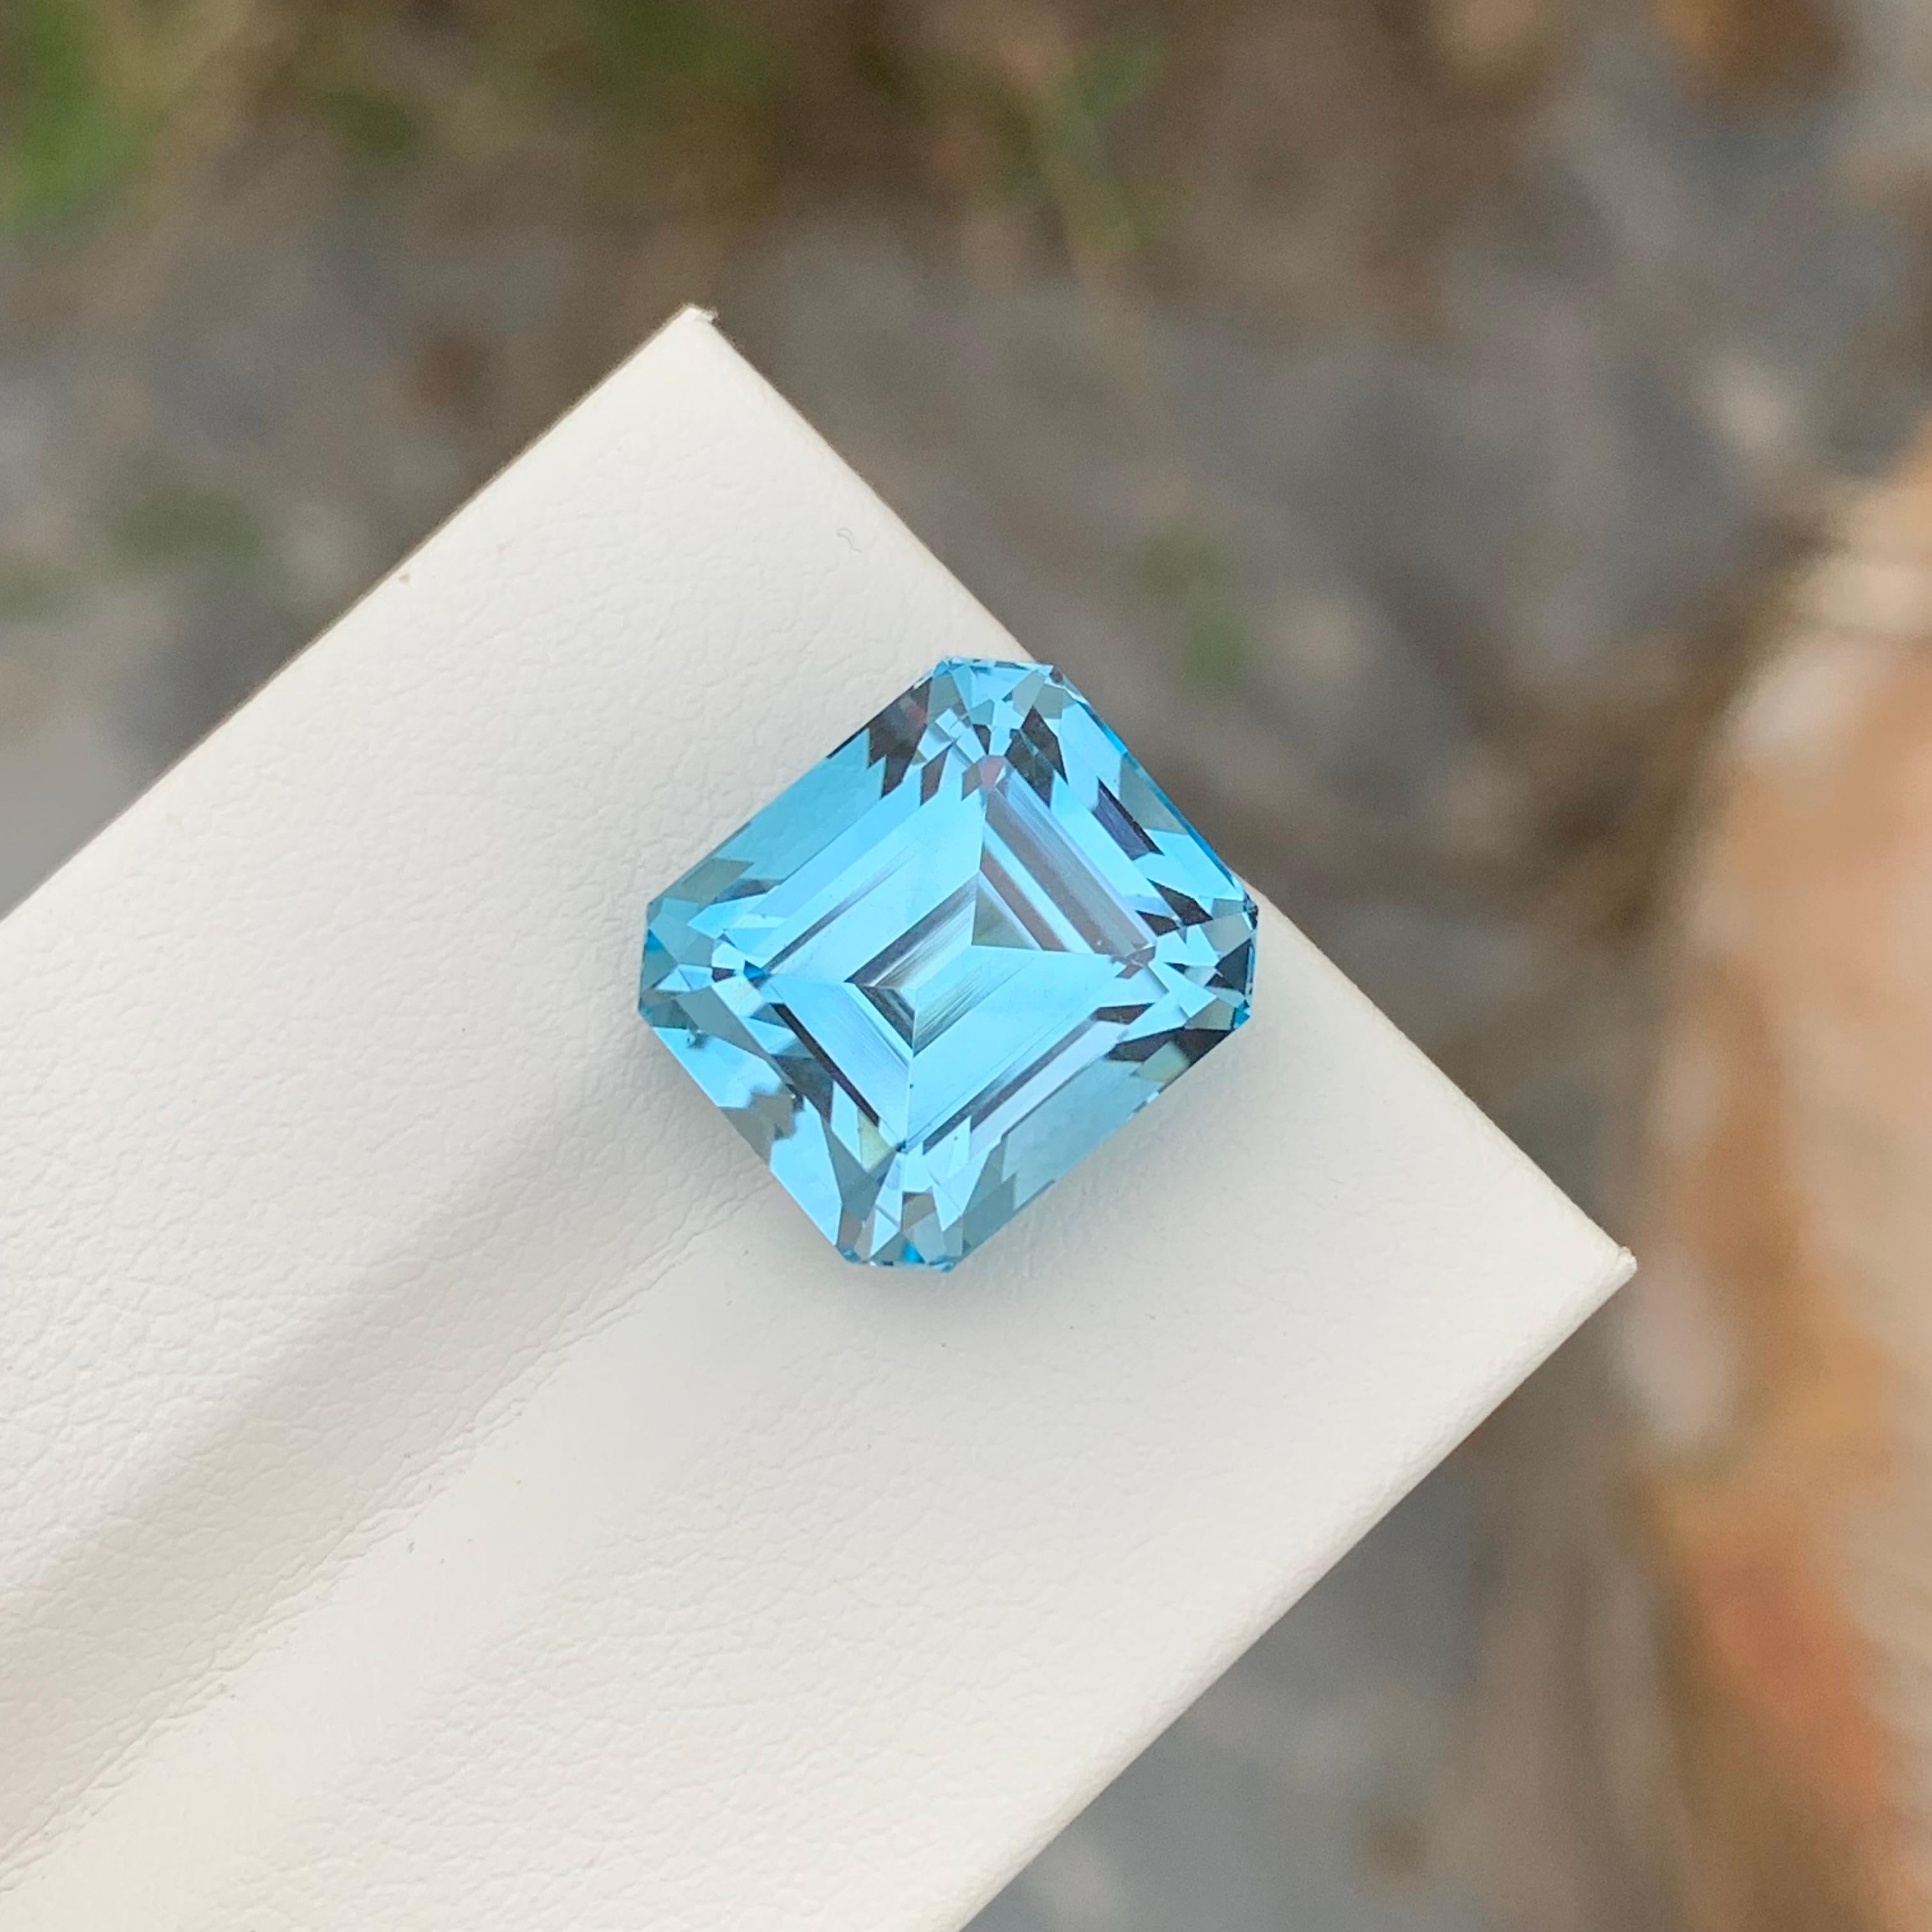 Loose Blue Topaz
Weight: 13.10 Carats
Dimensions: 12.9 x 11.2 x 9.6 Mm
Origin: Brazil
Shape: Asscher 
Color: Blue
Treatment: Non
Certificate: On Demand
Benefits Of Wearing Blue Topaz Stone:
It helps to improve communication and self-expression.
It